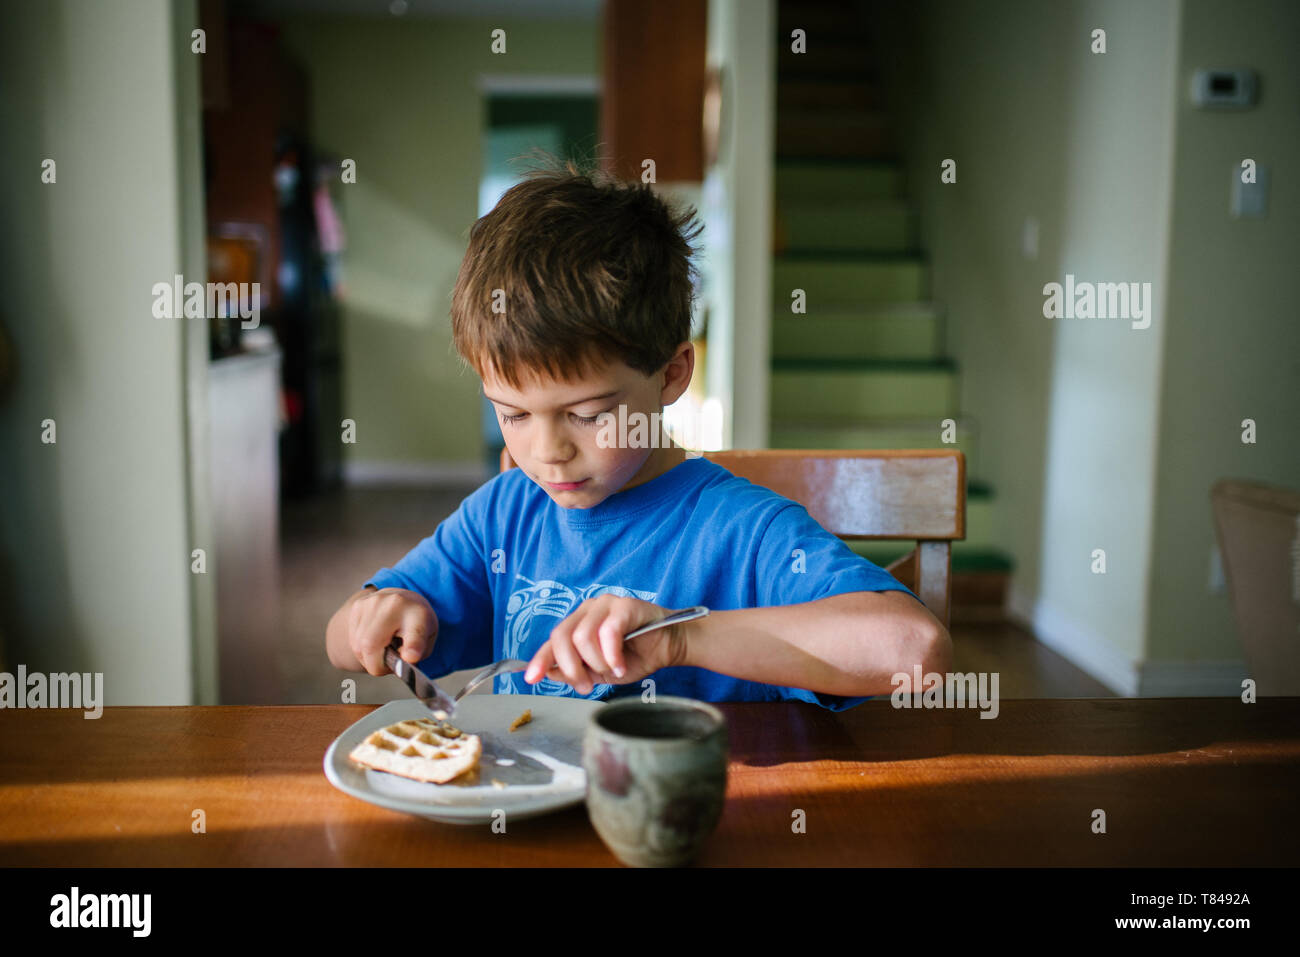 Boy eating waffle breakfast at kitchen table Stock Photo